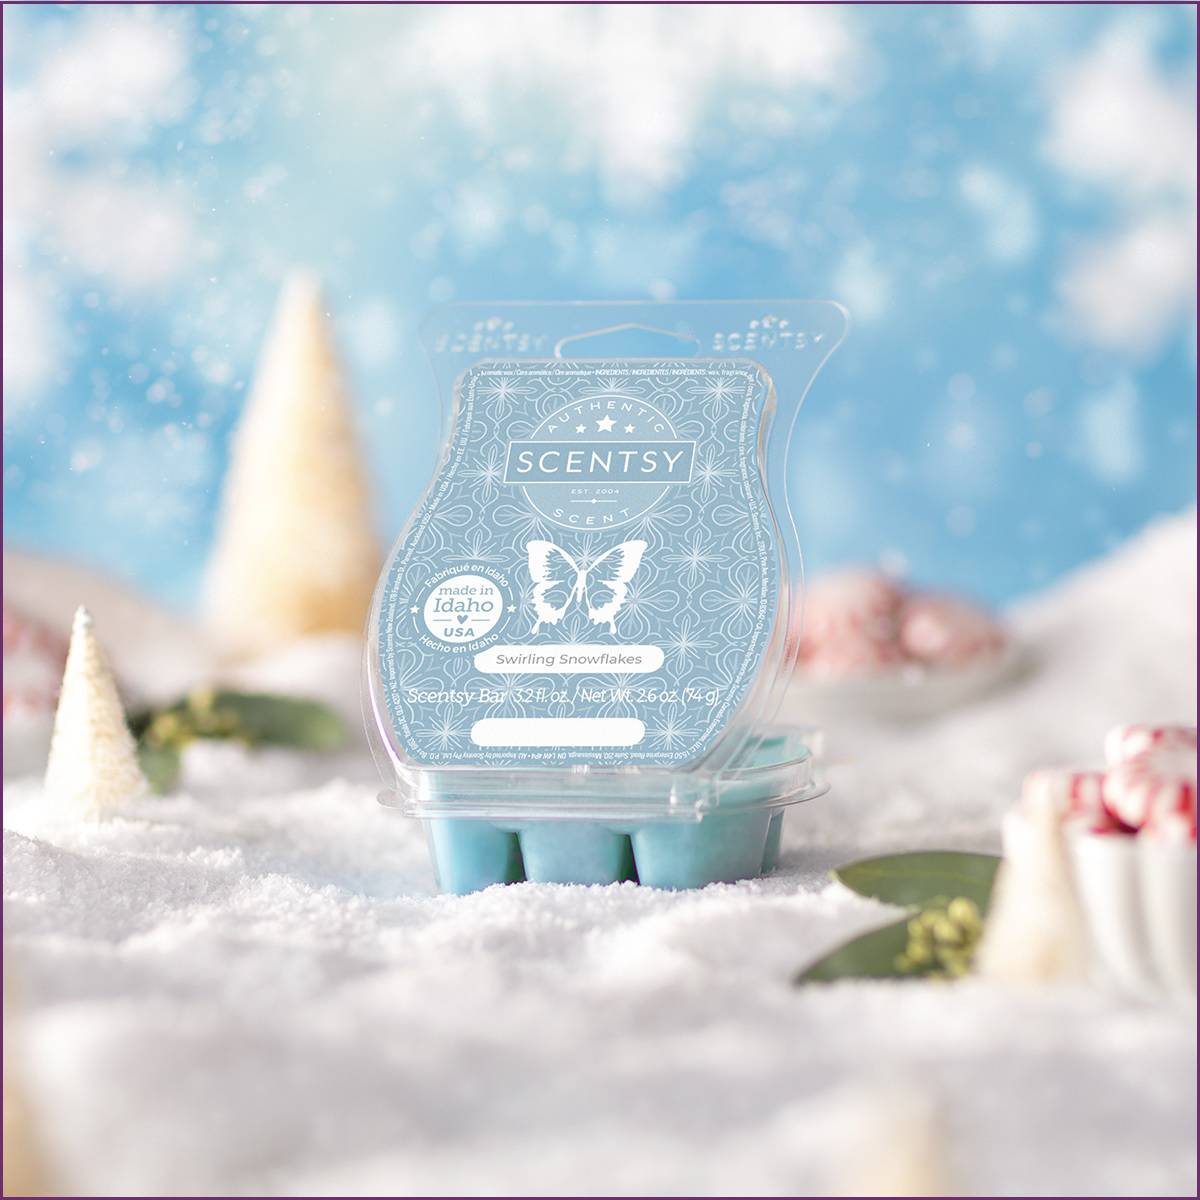 Swirling Snowflakes Scentsy Bar | Staged